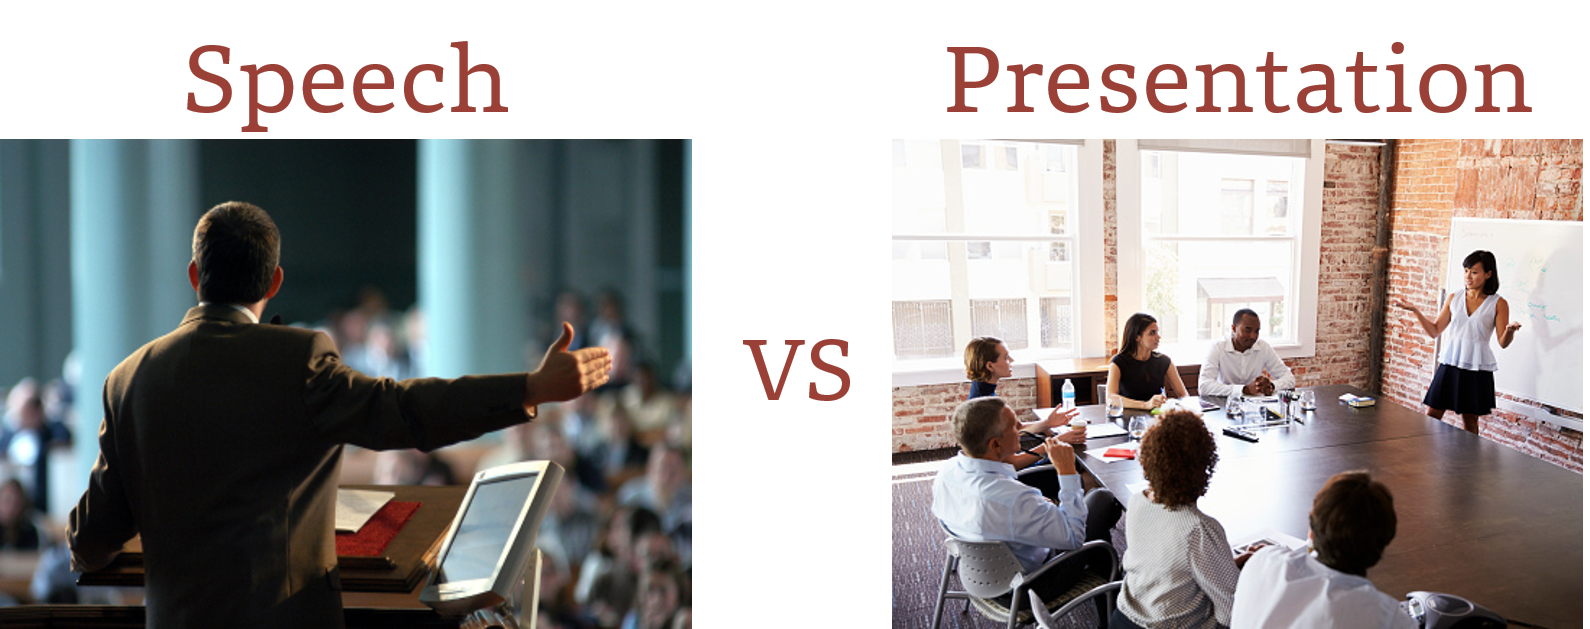 difference between speech and presentation in points